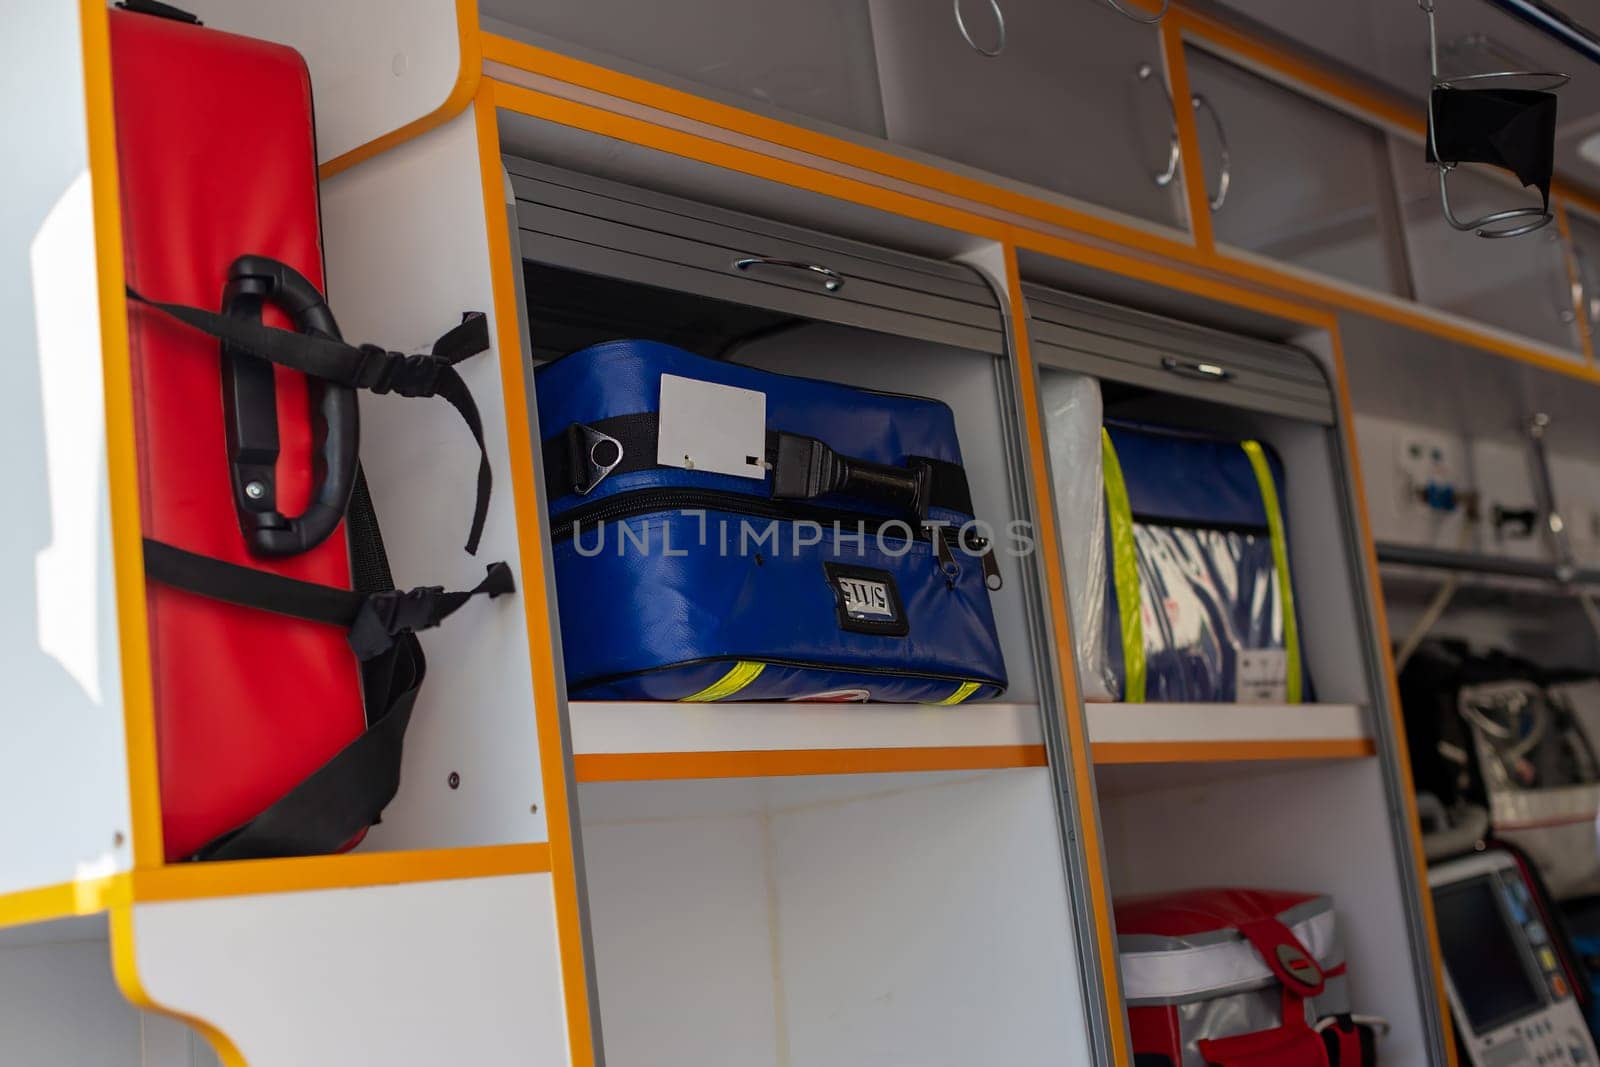 Inside the ambulance, medical supplies and storage compartments are visible, with red and blue bags.